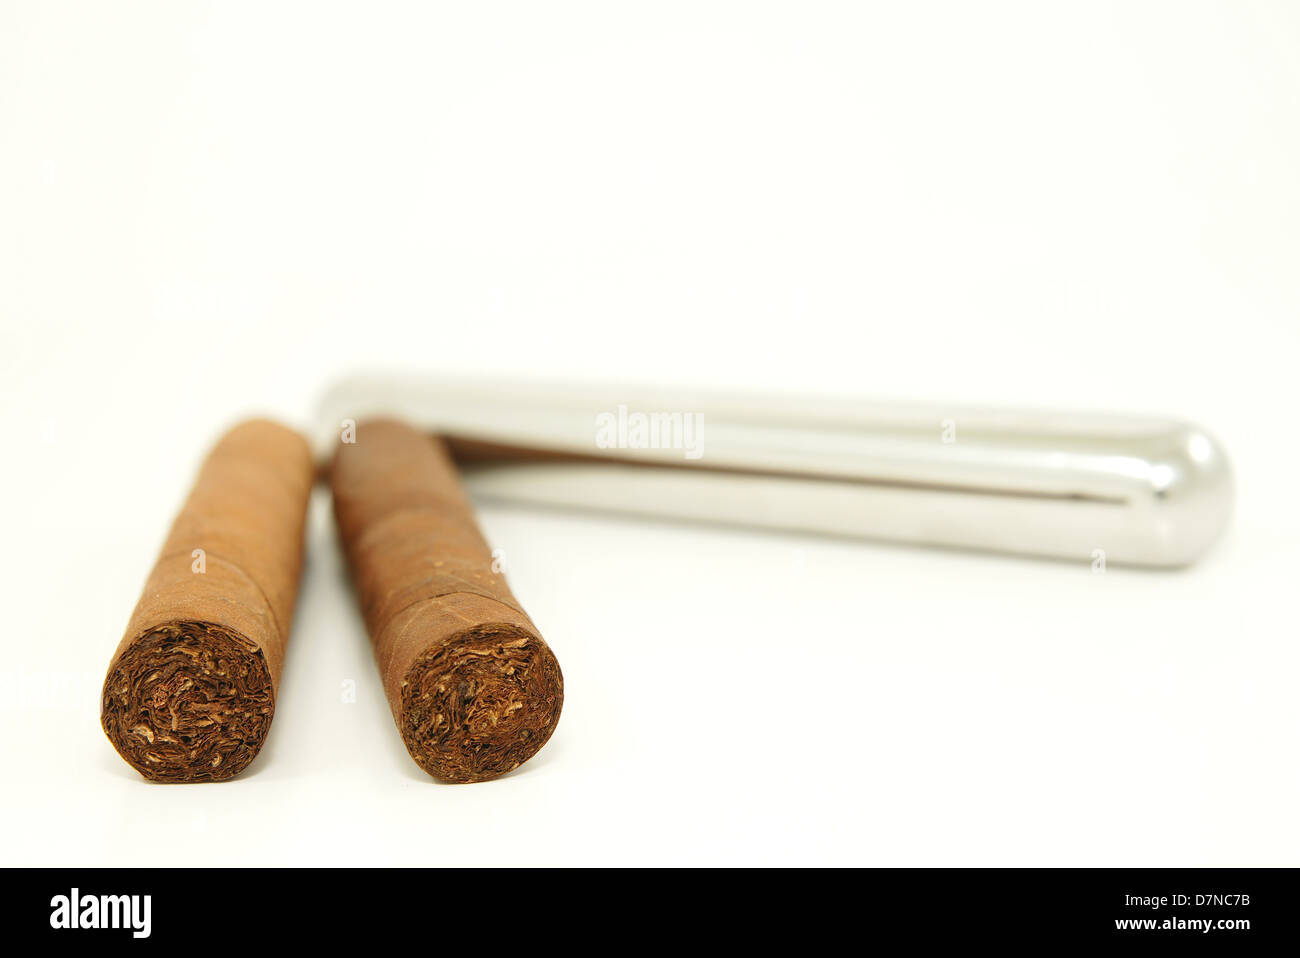 Close-up of two cigars and a stainless steel tube container Stock Photo